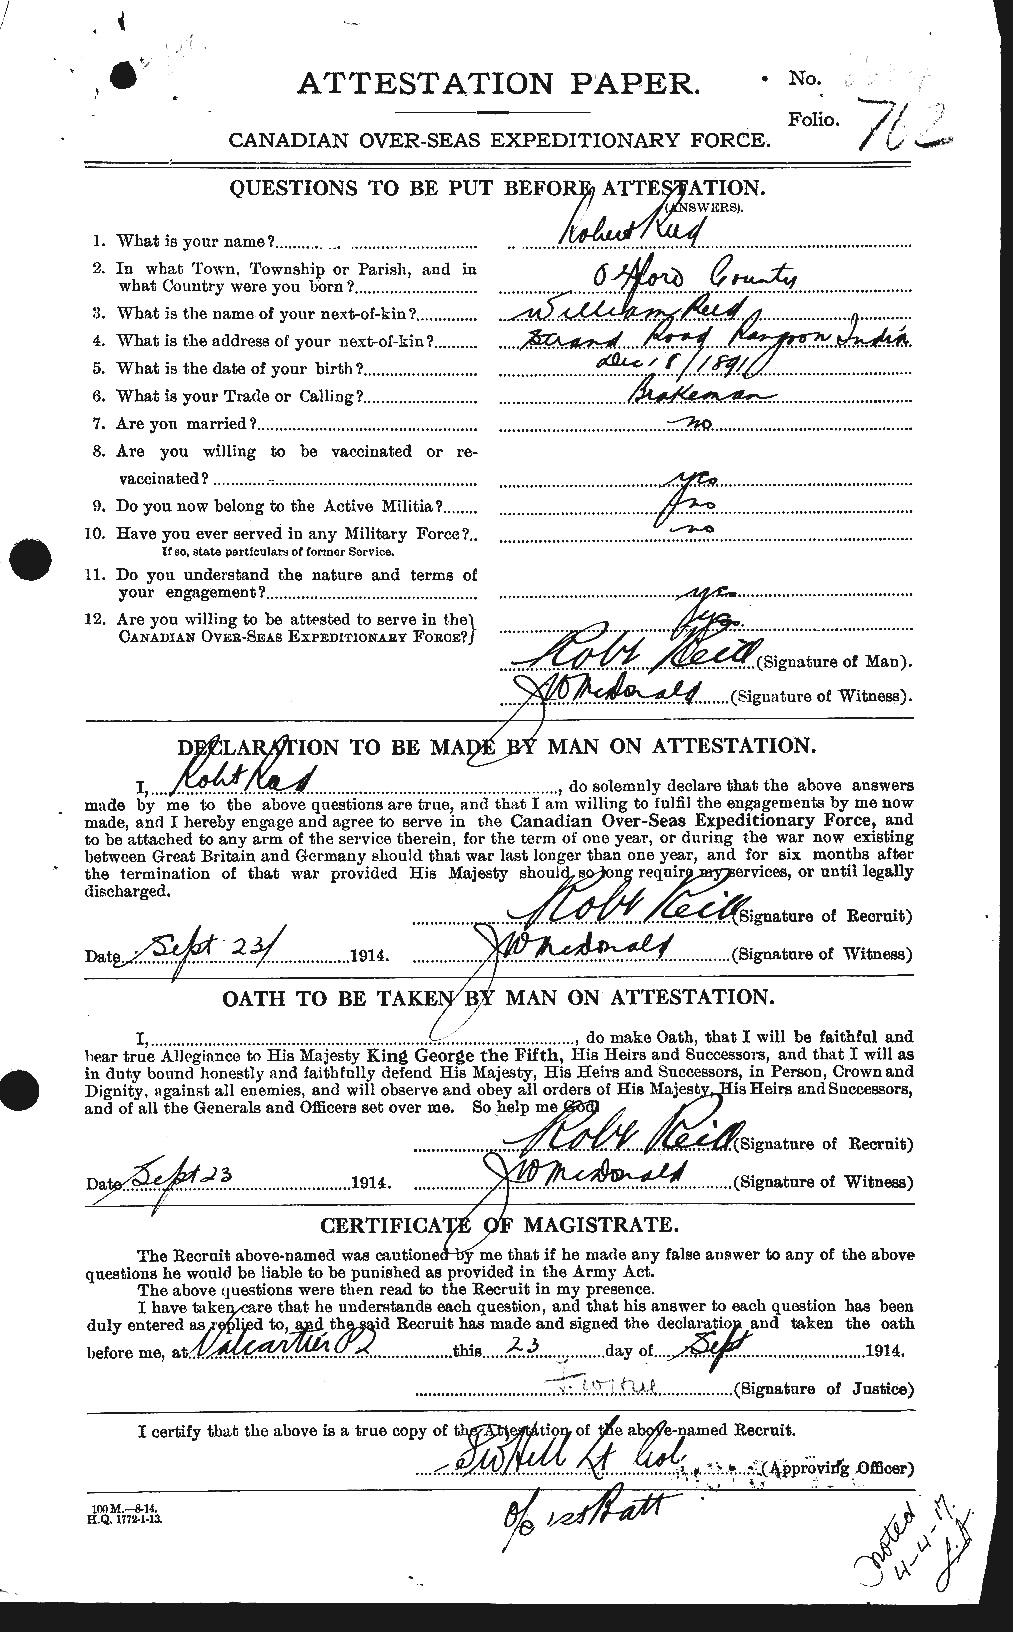 Personnel Records of the First World War - CEF 601865a